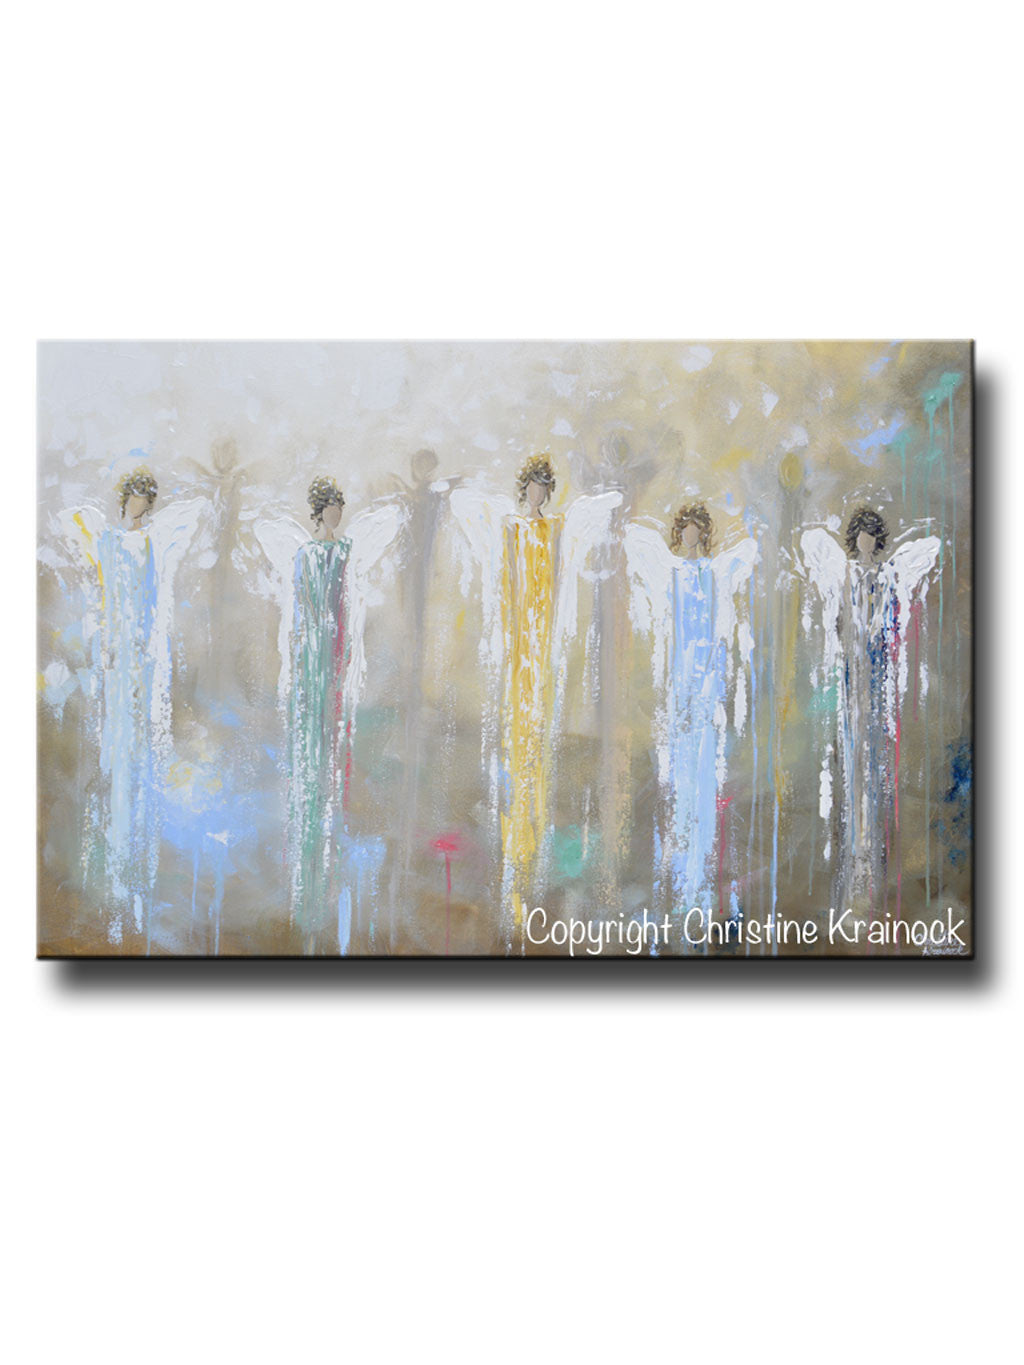 GICLEE PRINT Abstract Angel Painting Modern Gallery Wall Art Blue Gold –  Contemporary Art by Christine